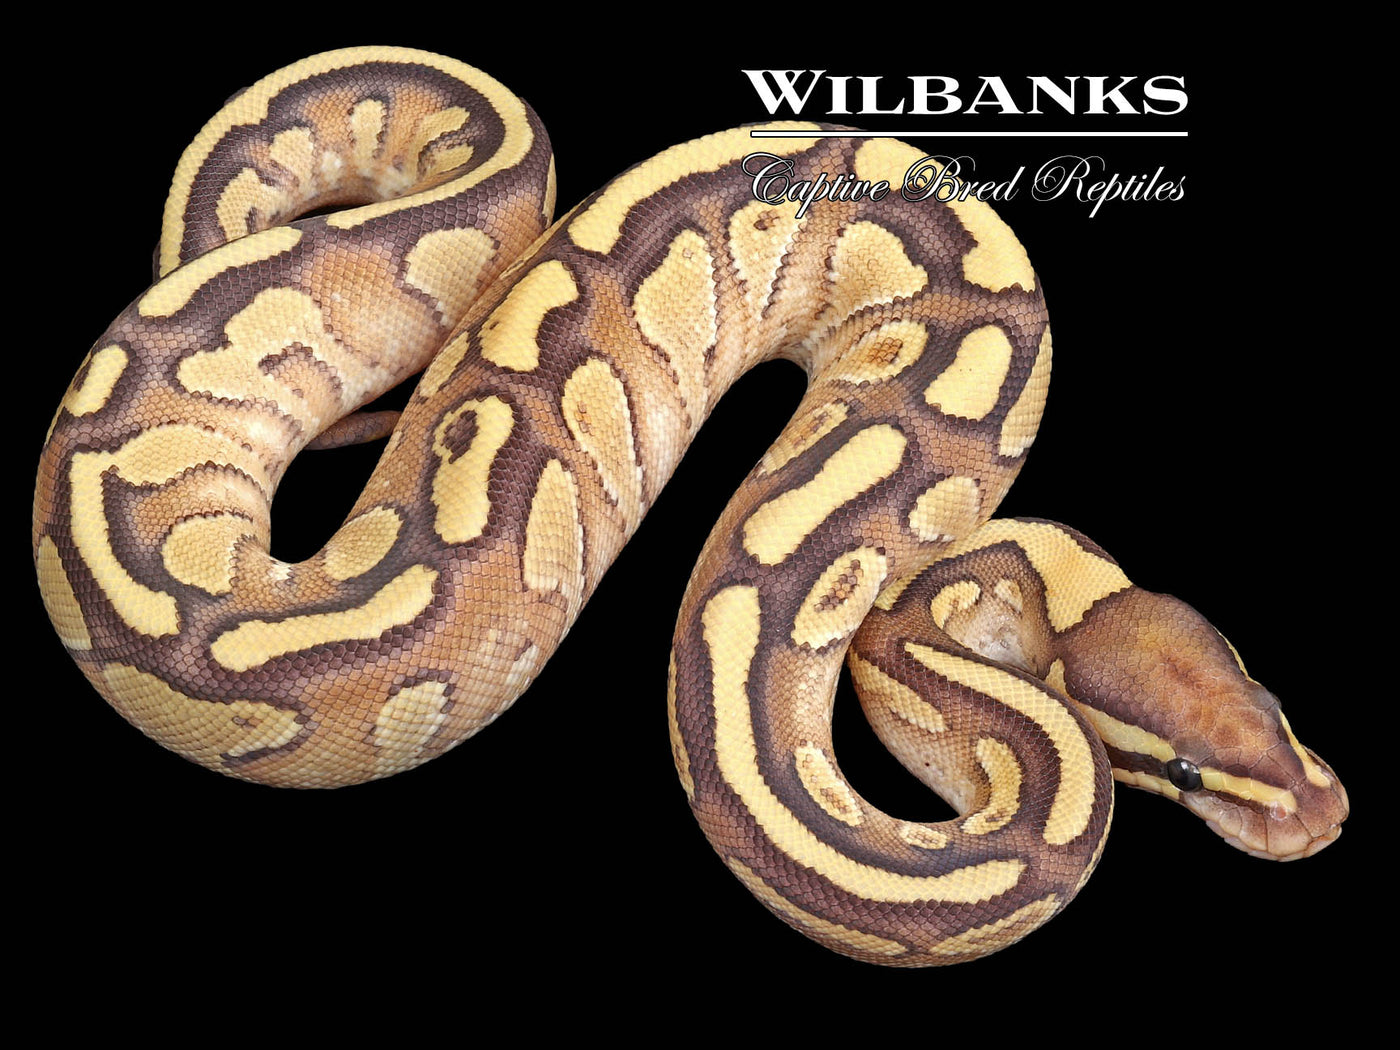 Nuclear Yellow Belly Ball Python ♀ '23